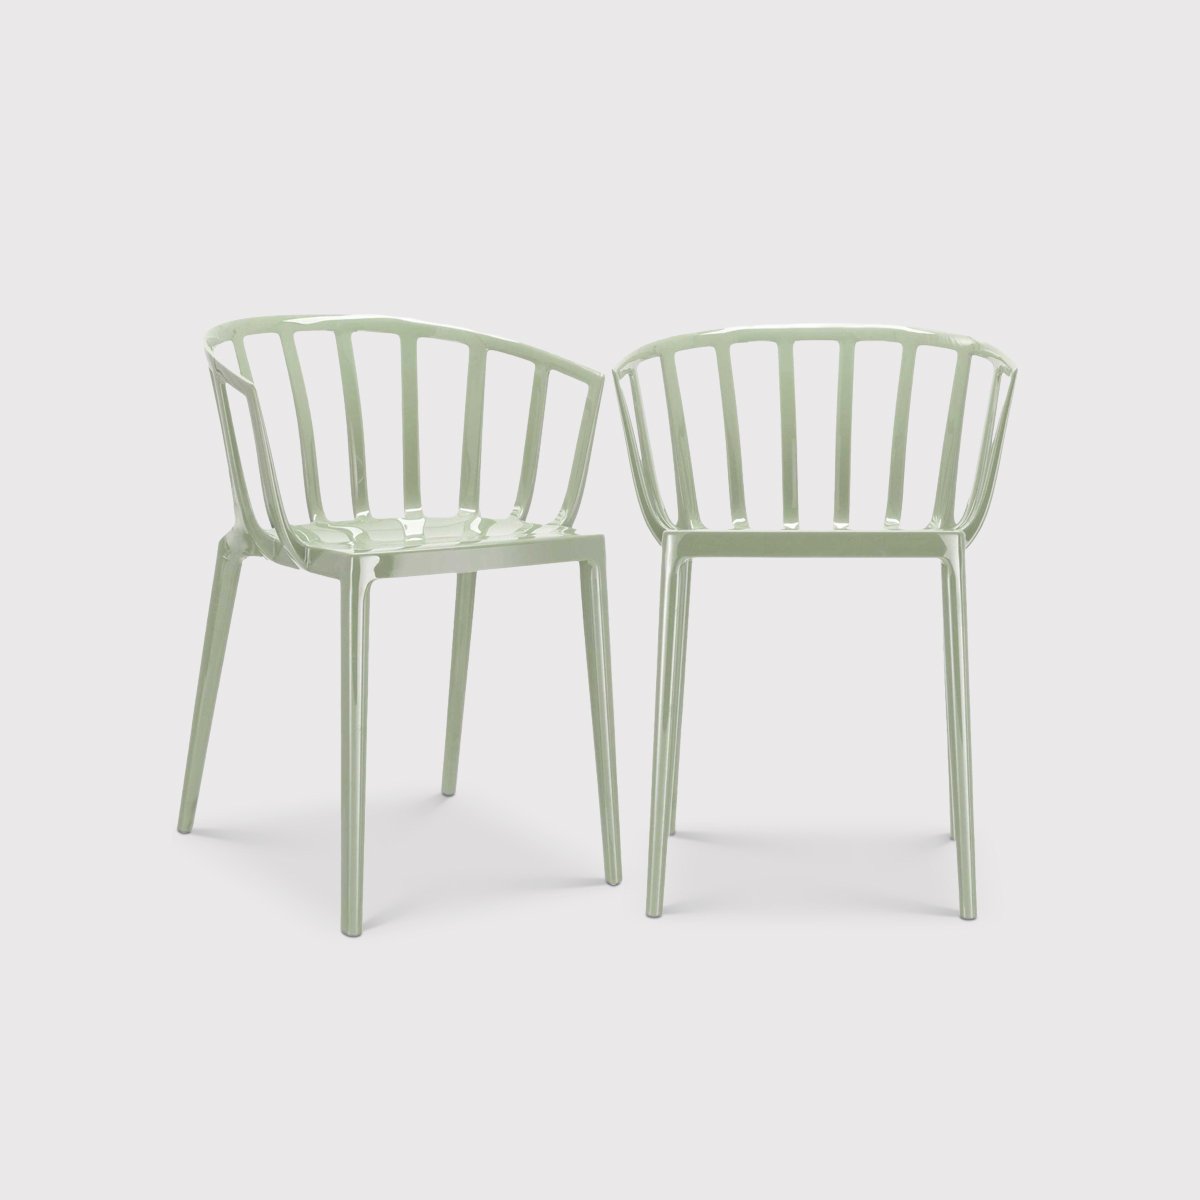 Pair of Kartell Venice Dining Chairs, Green | Kartell